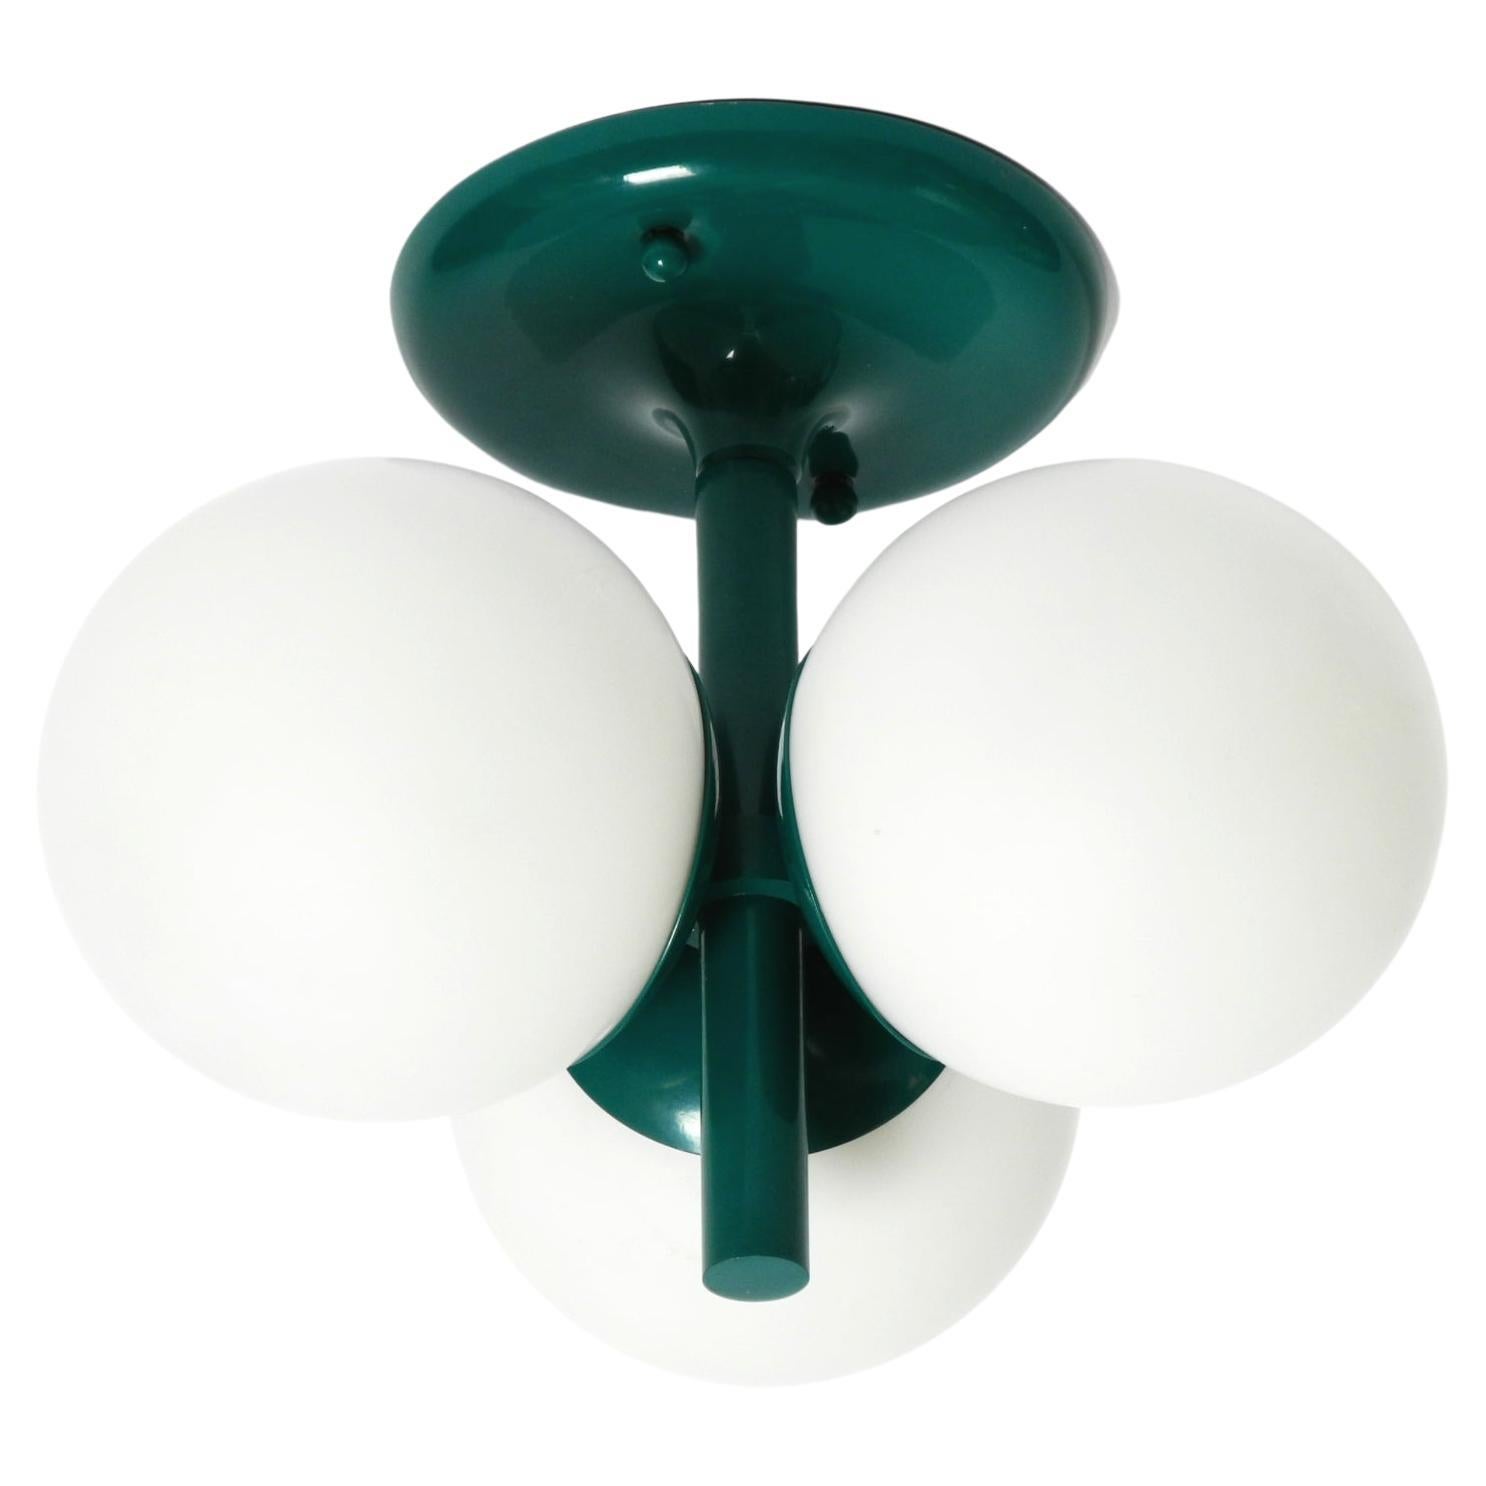 Green 1960s Space Age Kaiser Leuchten metal ceiling lamps with 3 glass balls